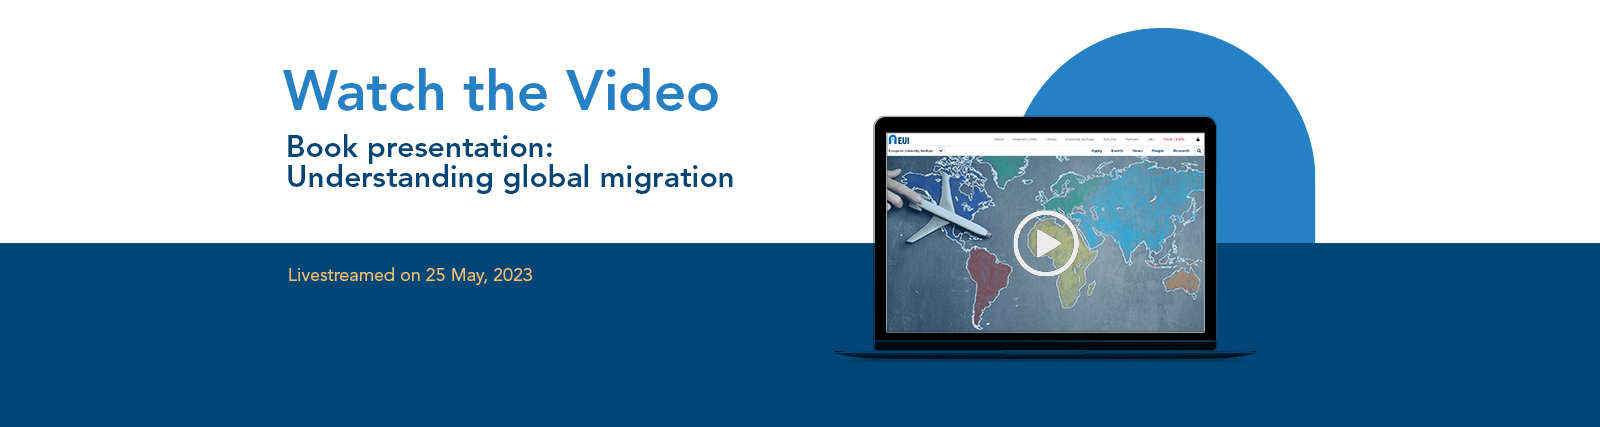 Permalink to:Watch the recording of book’s ‘Understanding Global Migration’ presentation!